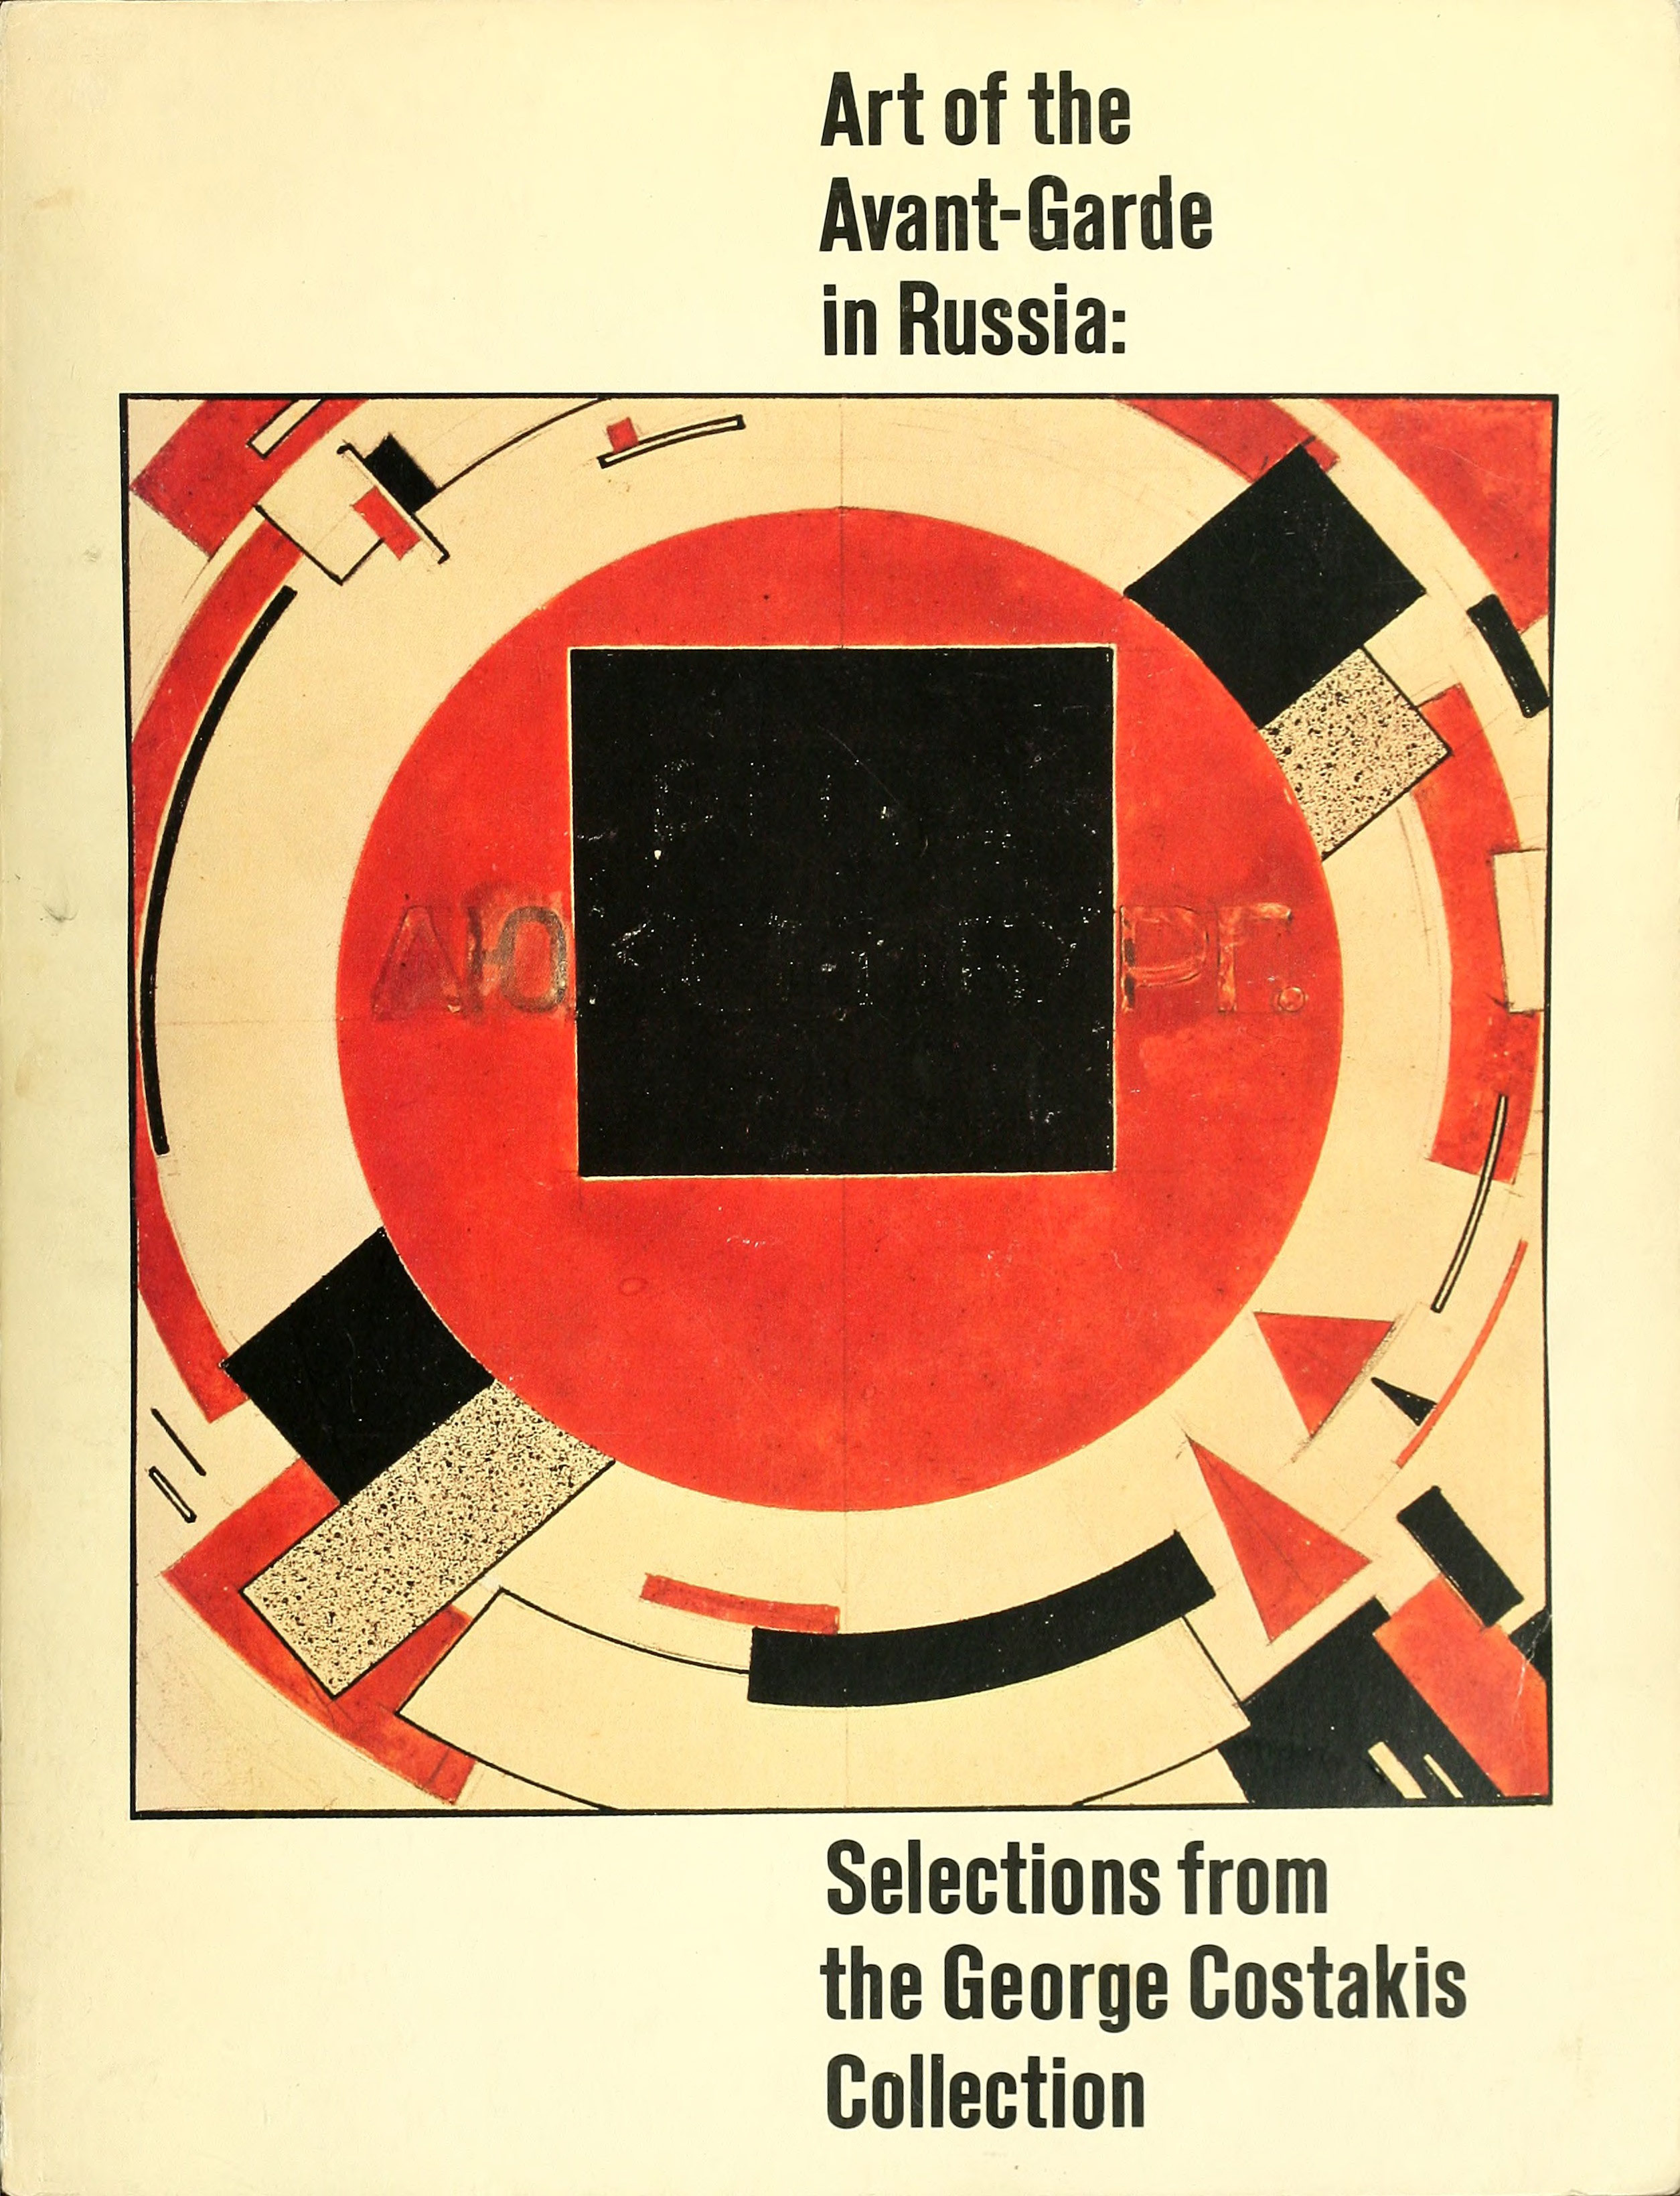 Art of the Avant-Garde in Russia: Selections from the George